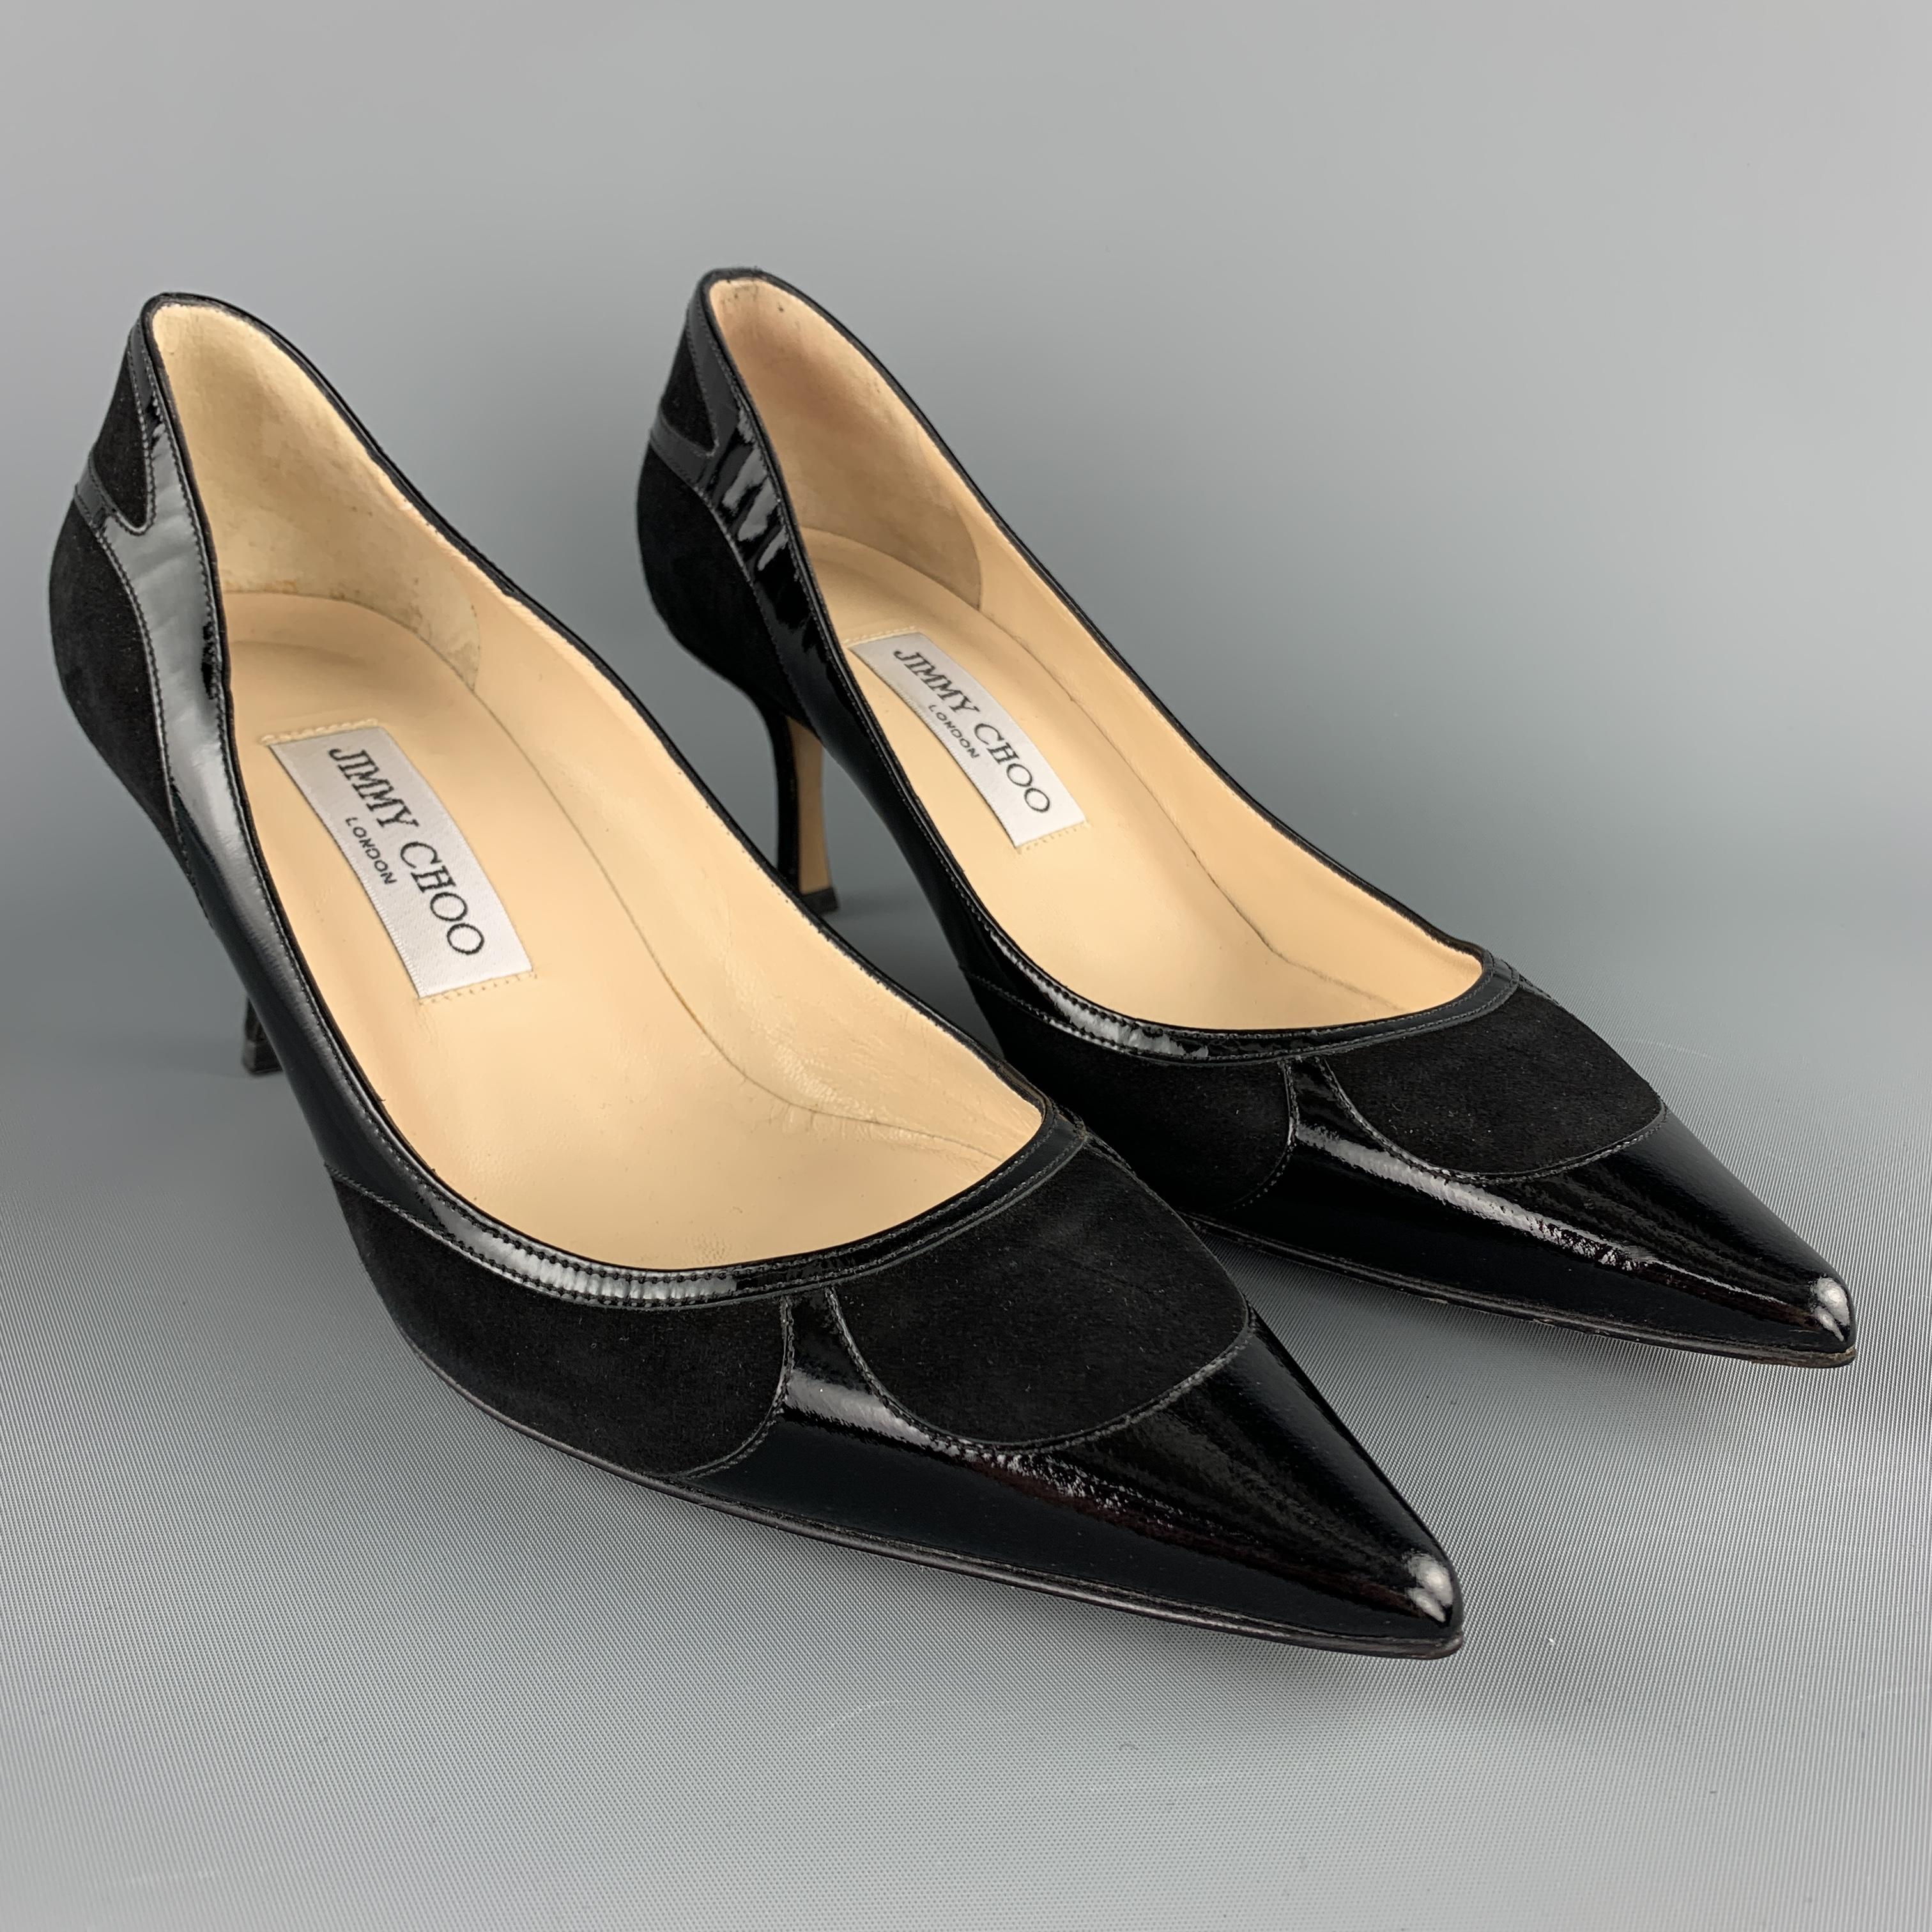 JIMMY CHOO pumps come in black suede with patent leather panels and a pointed toe. Made in Italy.

Excellent Pre-Owned Condition.
Marked: IT 38

Measurements:

Heel: 2.75 in.